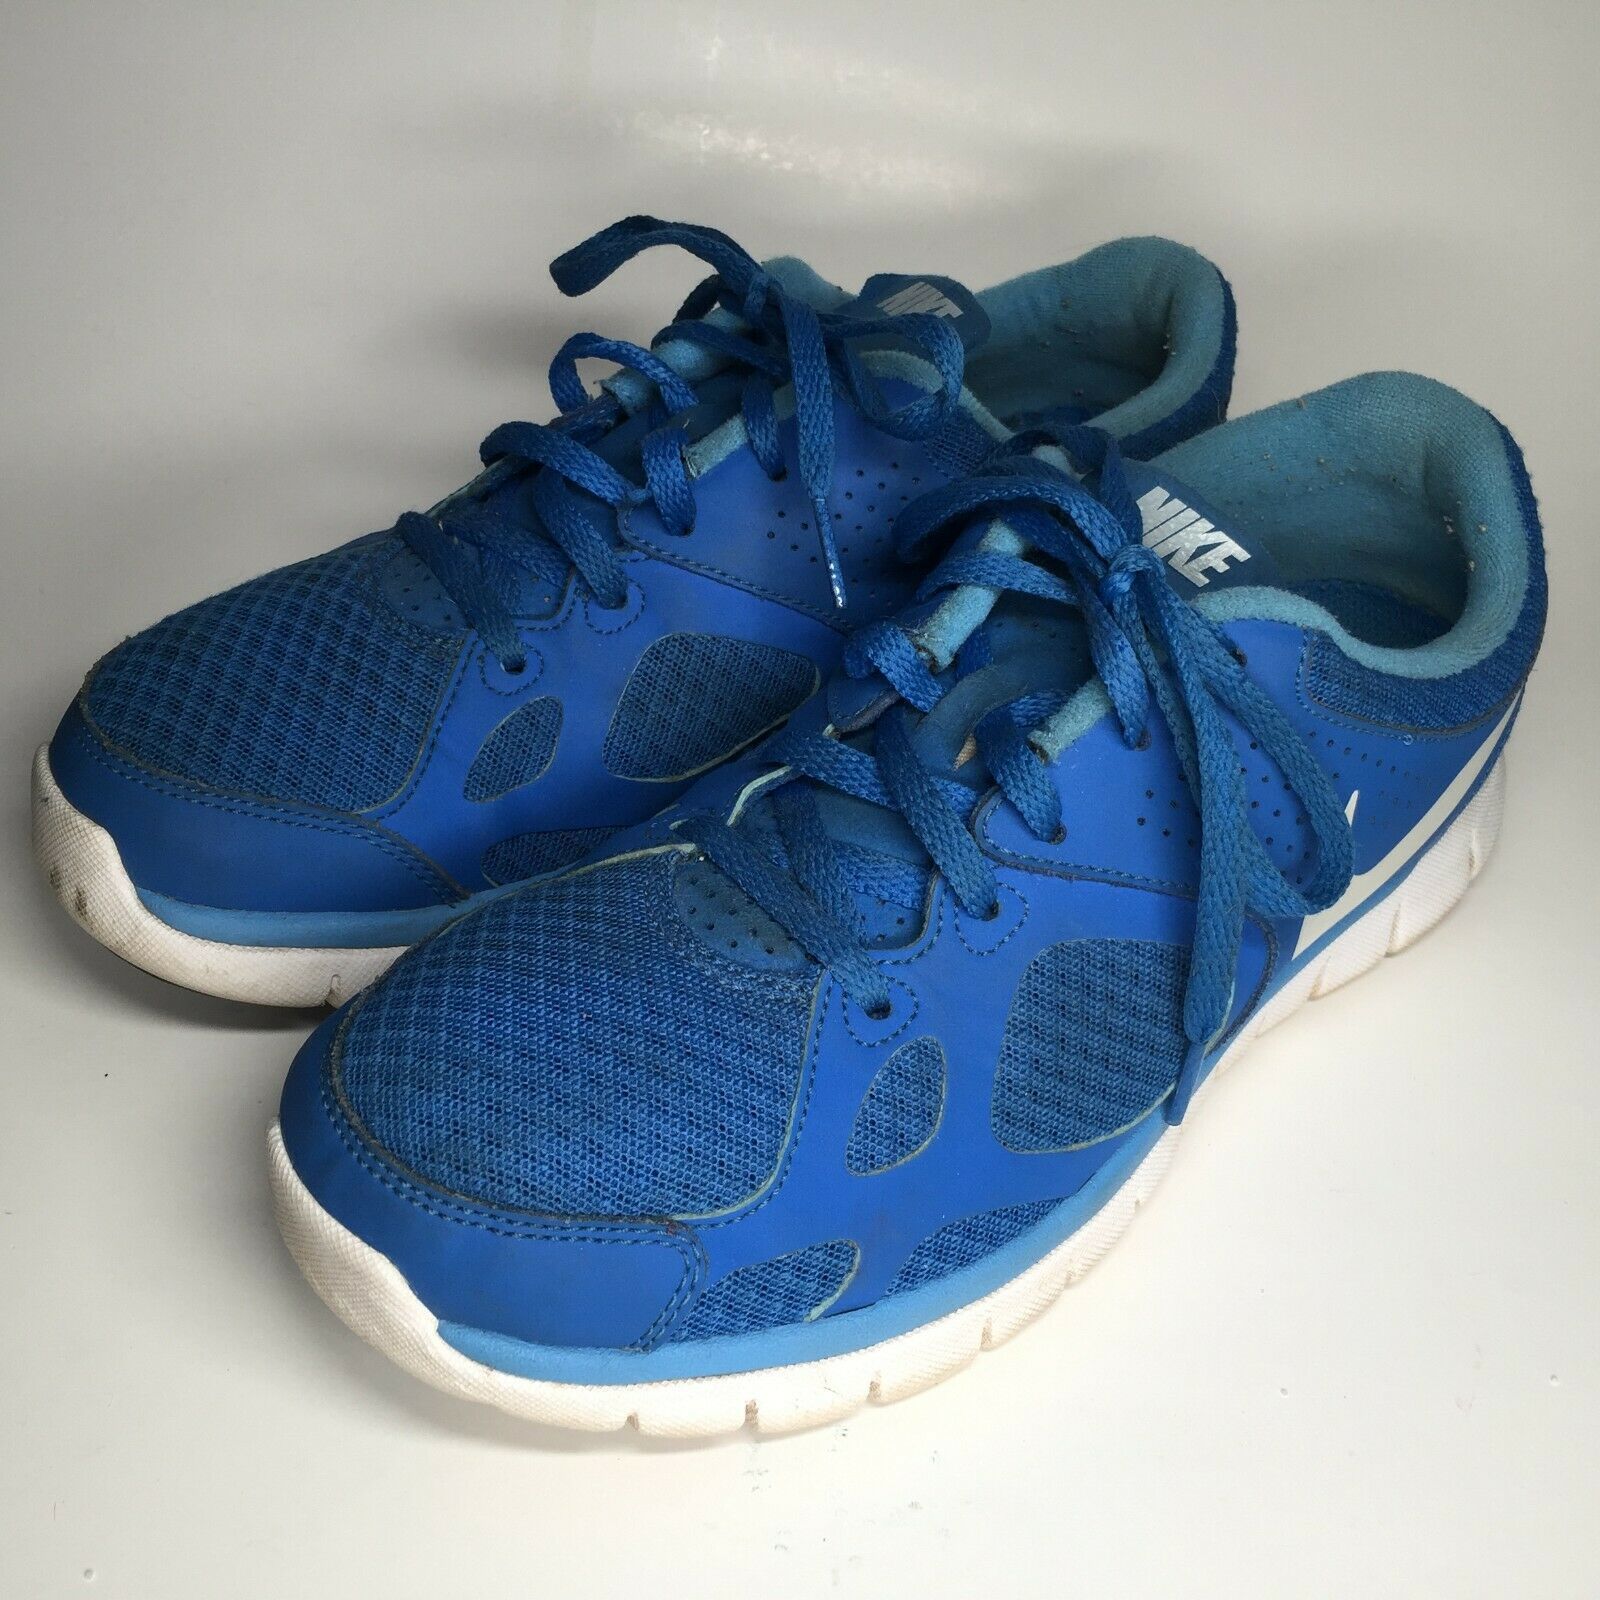 Primary image for Nike Womens Flex 2012 Run Running Shoes Blue 512108-402 Lace Up Low Top 8.5